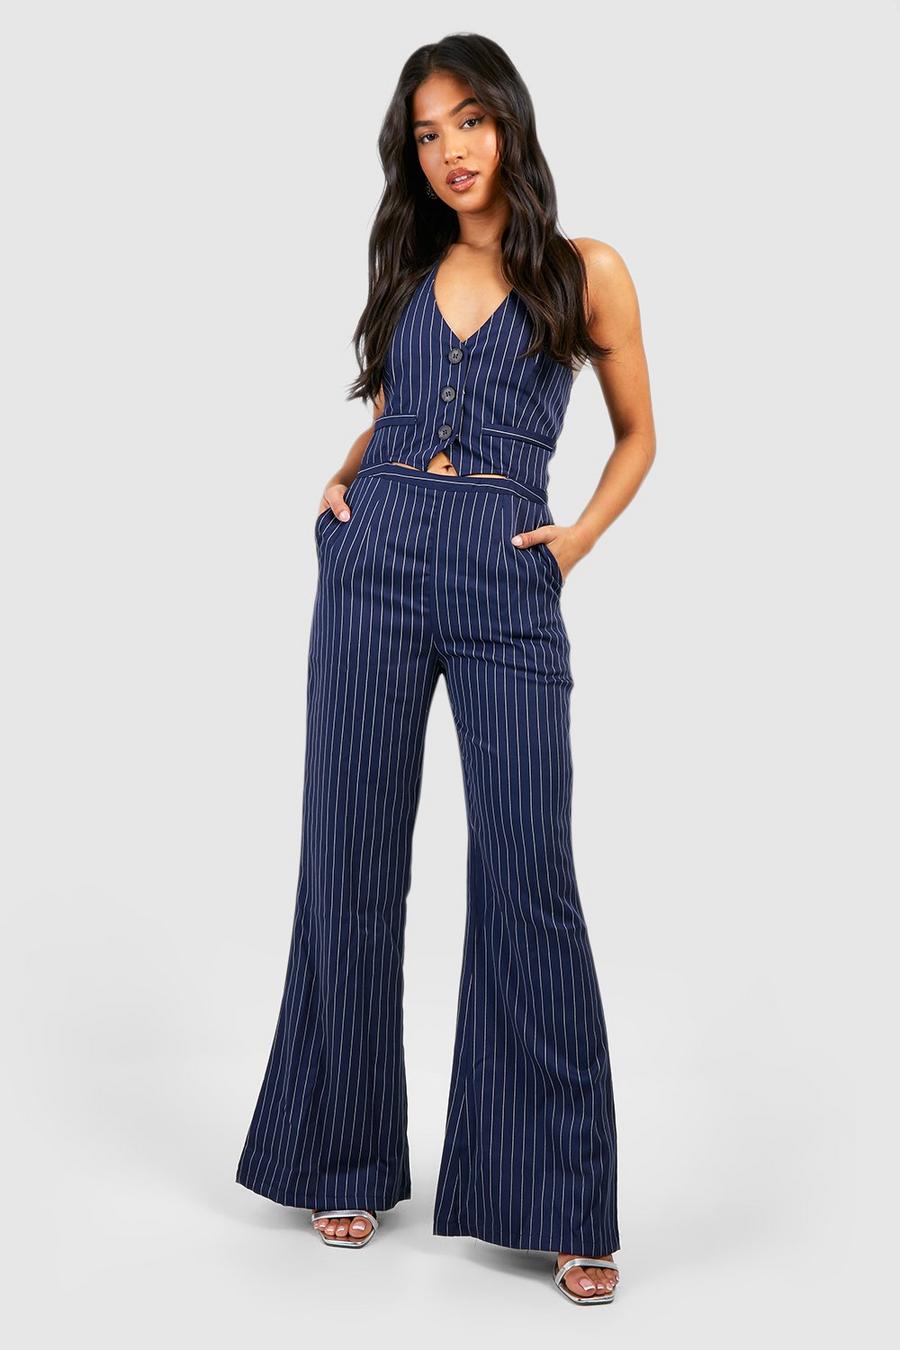 Petite Jumpsuits & Petite Rompers for Women